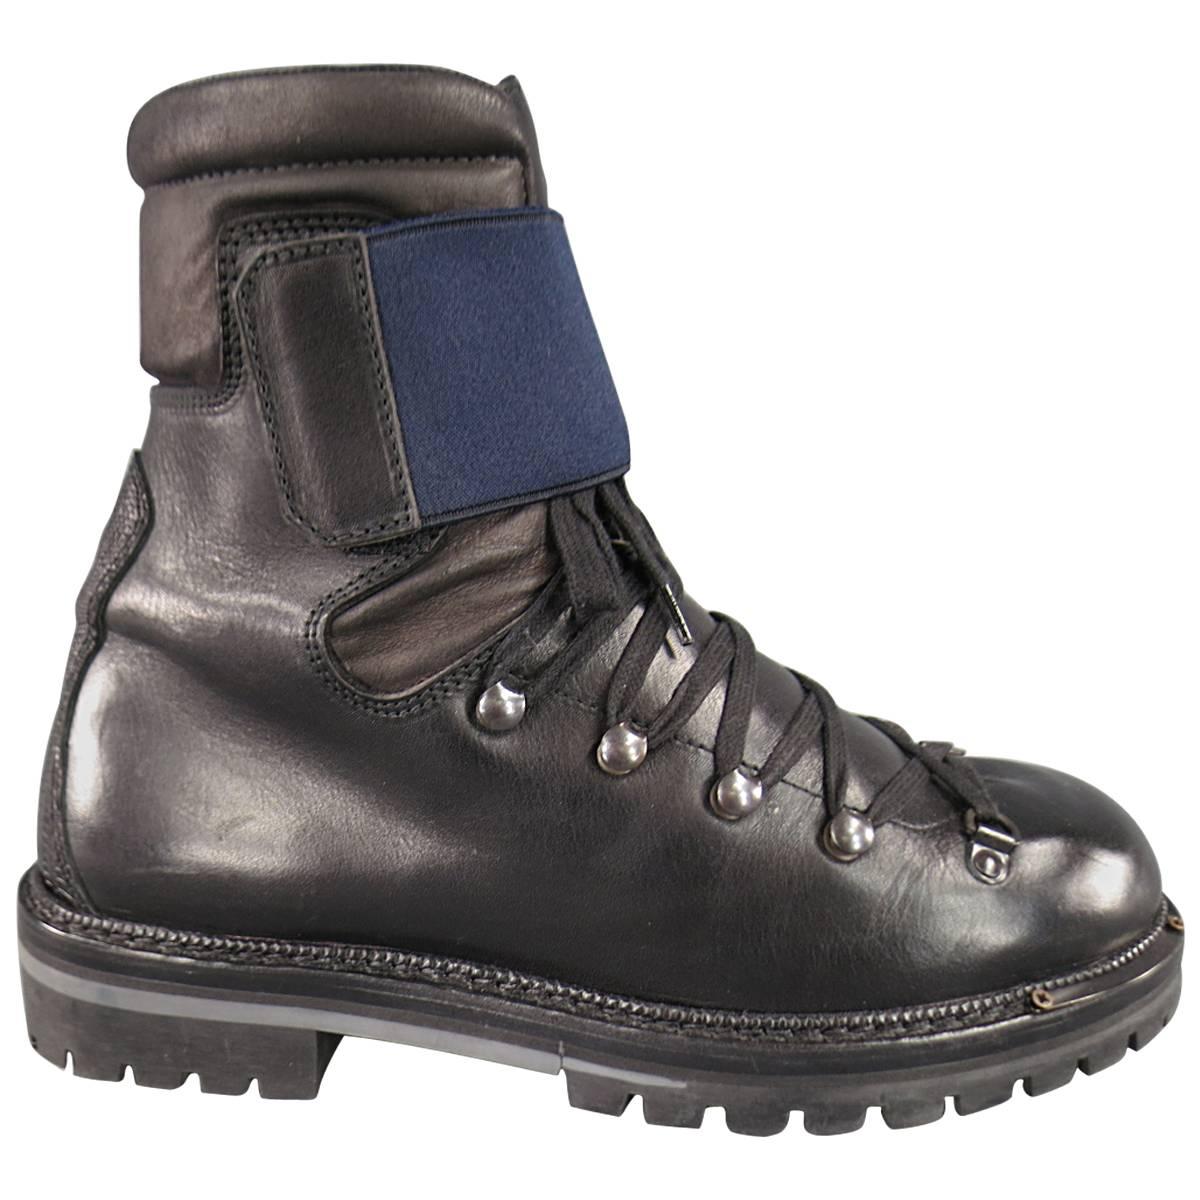 LANVIN Size 8 Black Leather Navy Strap Tall Mountain Boots